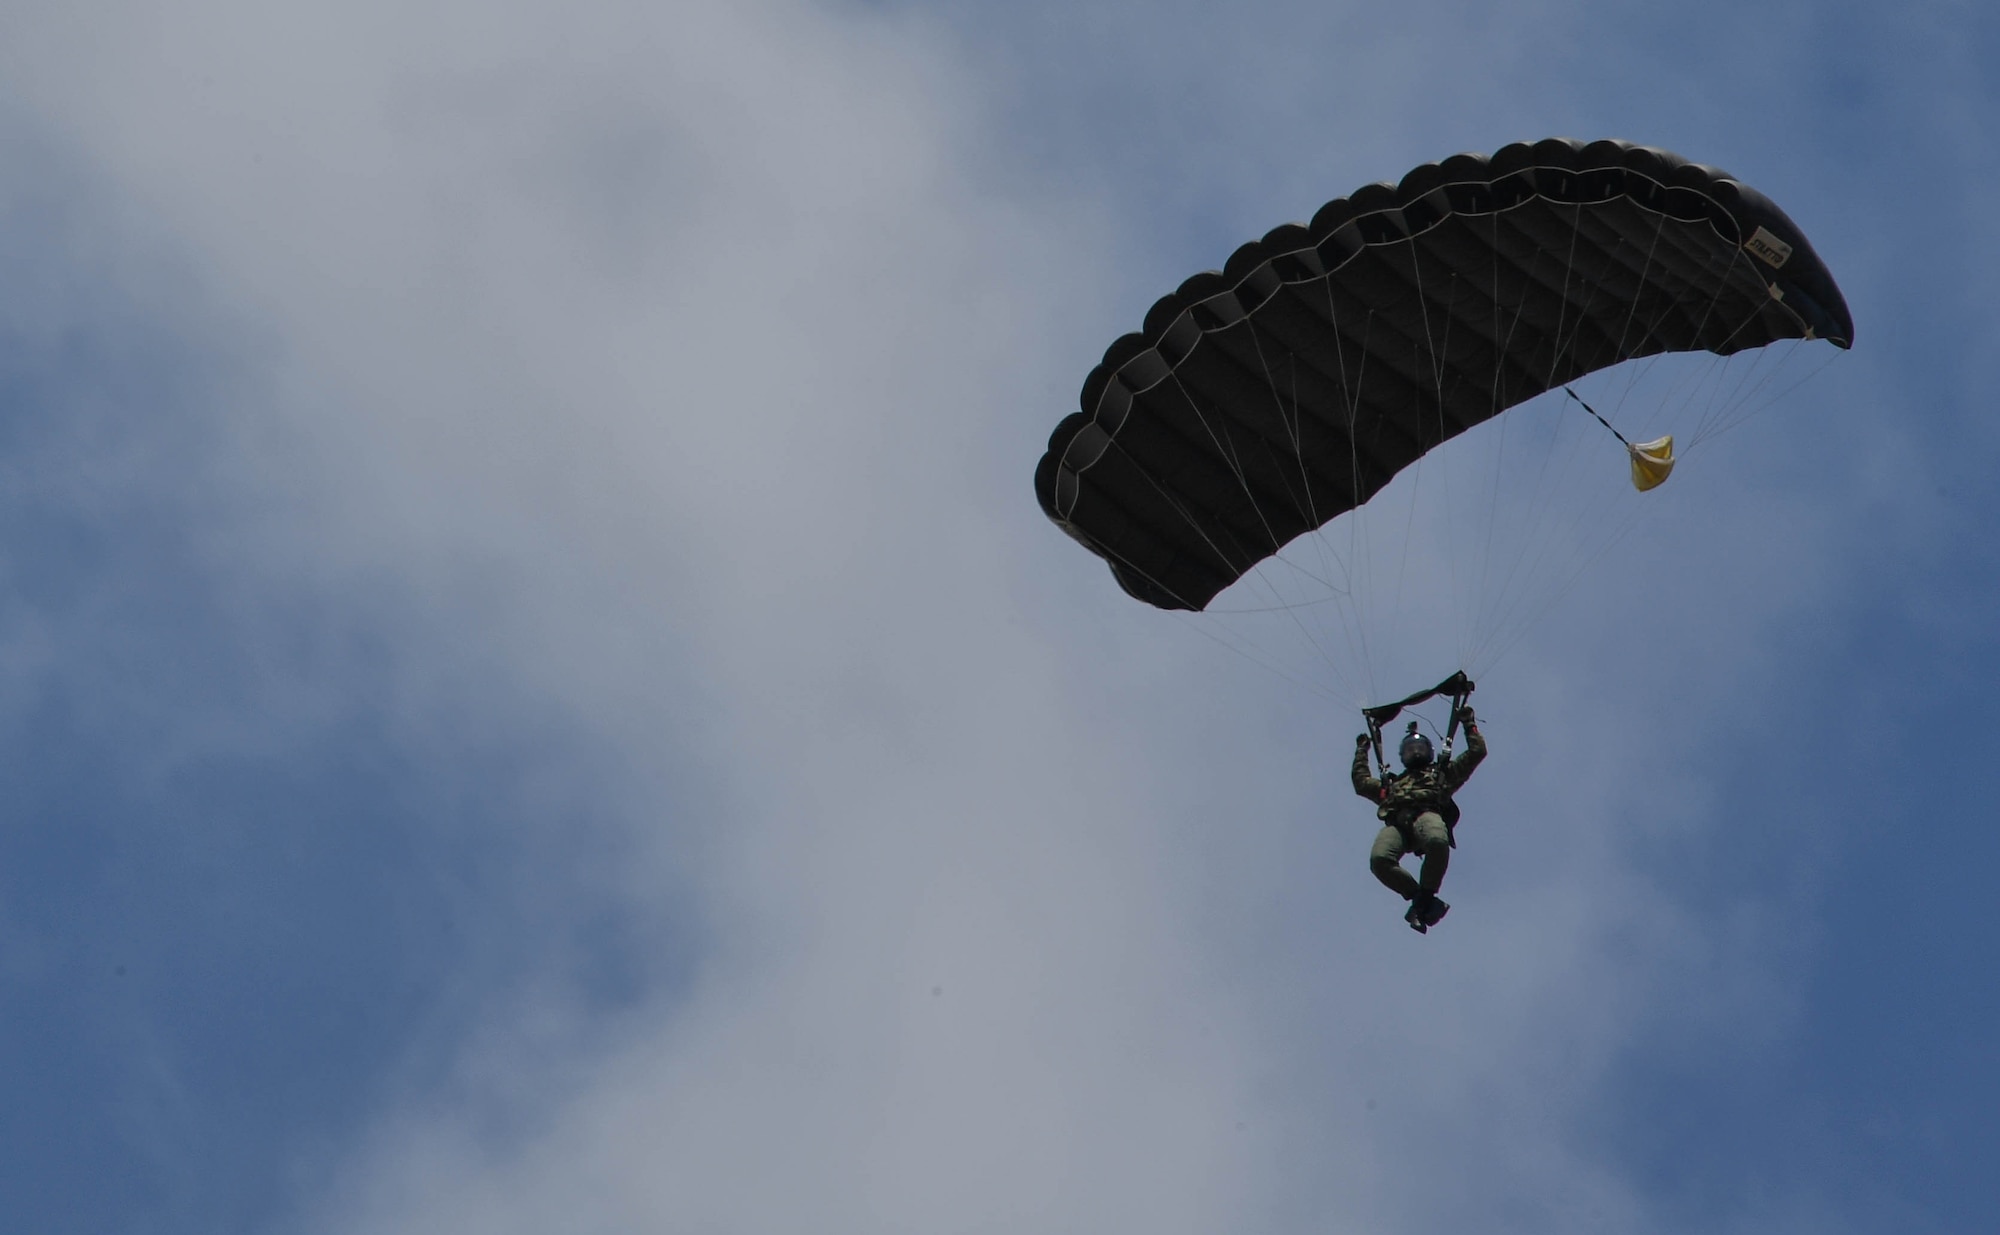 A Greek paratrooper descends to the ground after conducting a military free-fall jump out of a U.S. Air Force C-130J Super Hercules during Exercise Stolen Cerberus IV above Megara, Greece, April 22, 2017. Approximately 20 paratroopers performed the military free-fall jump from the height of 10,000 feet. Through exercises such as this the U.S. strengthens its partnership with its NATO allies. (U.S Air Force photo by Senior Airman Tryphena Mayhugh)